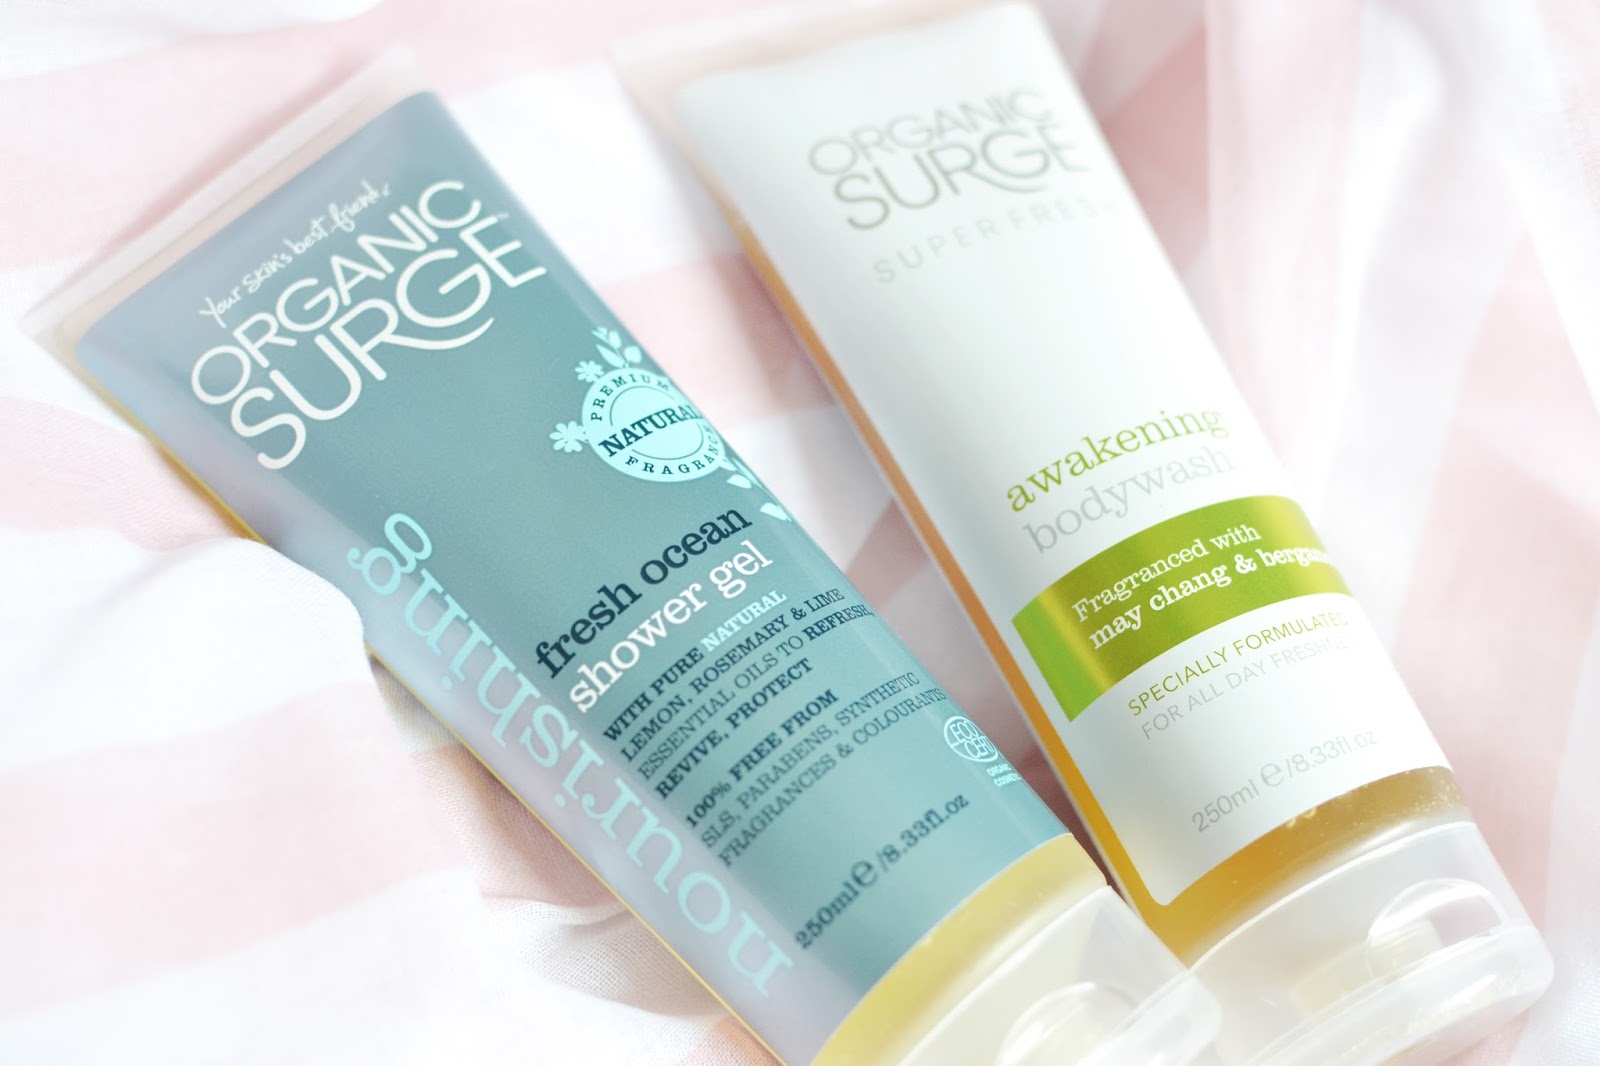 shower gels for dry skin, Organic surge products, organic surge review, natural and organic beauty products